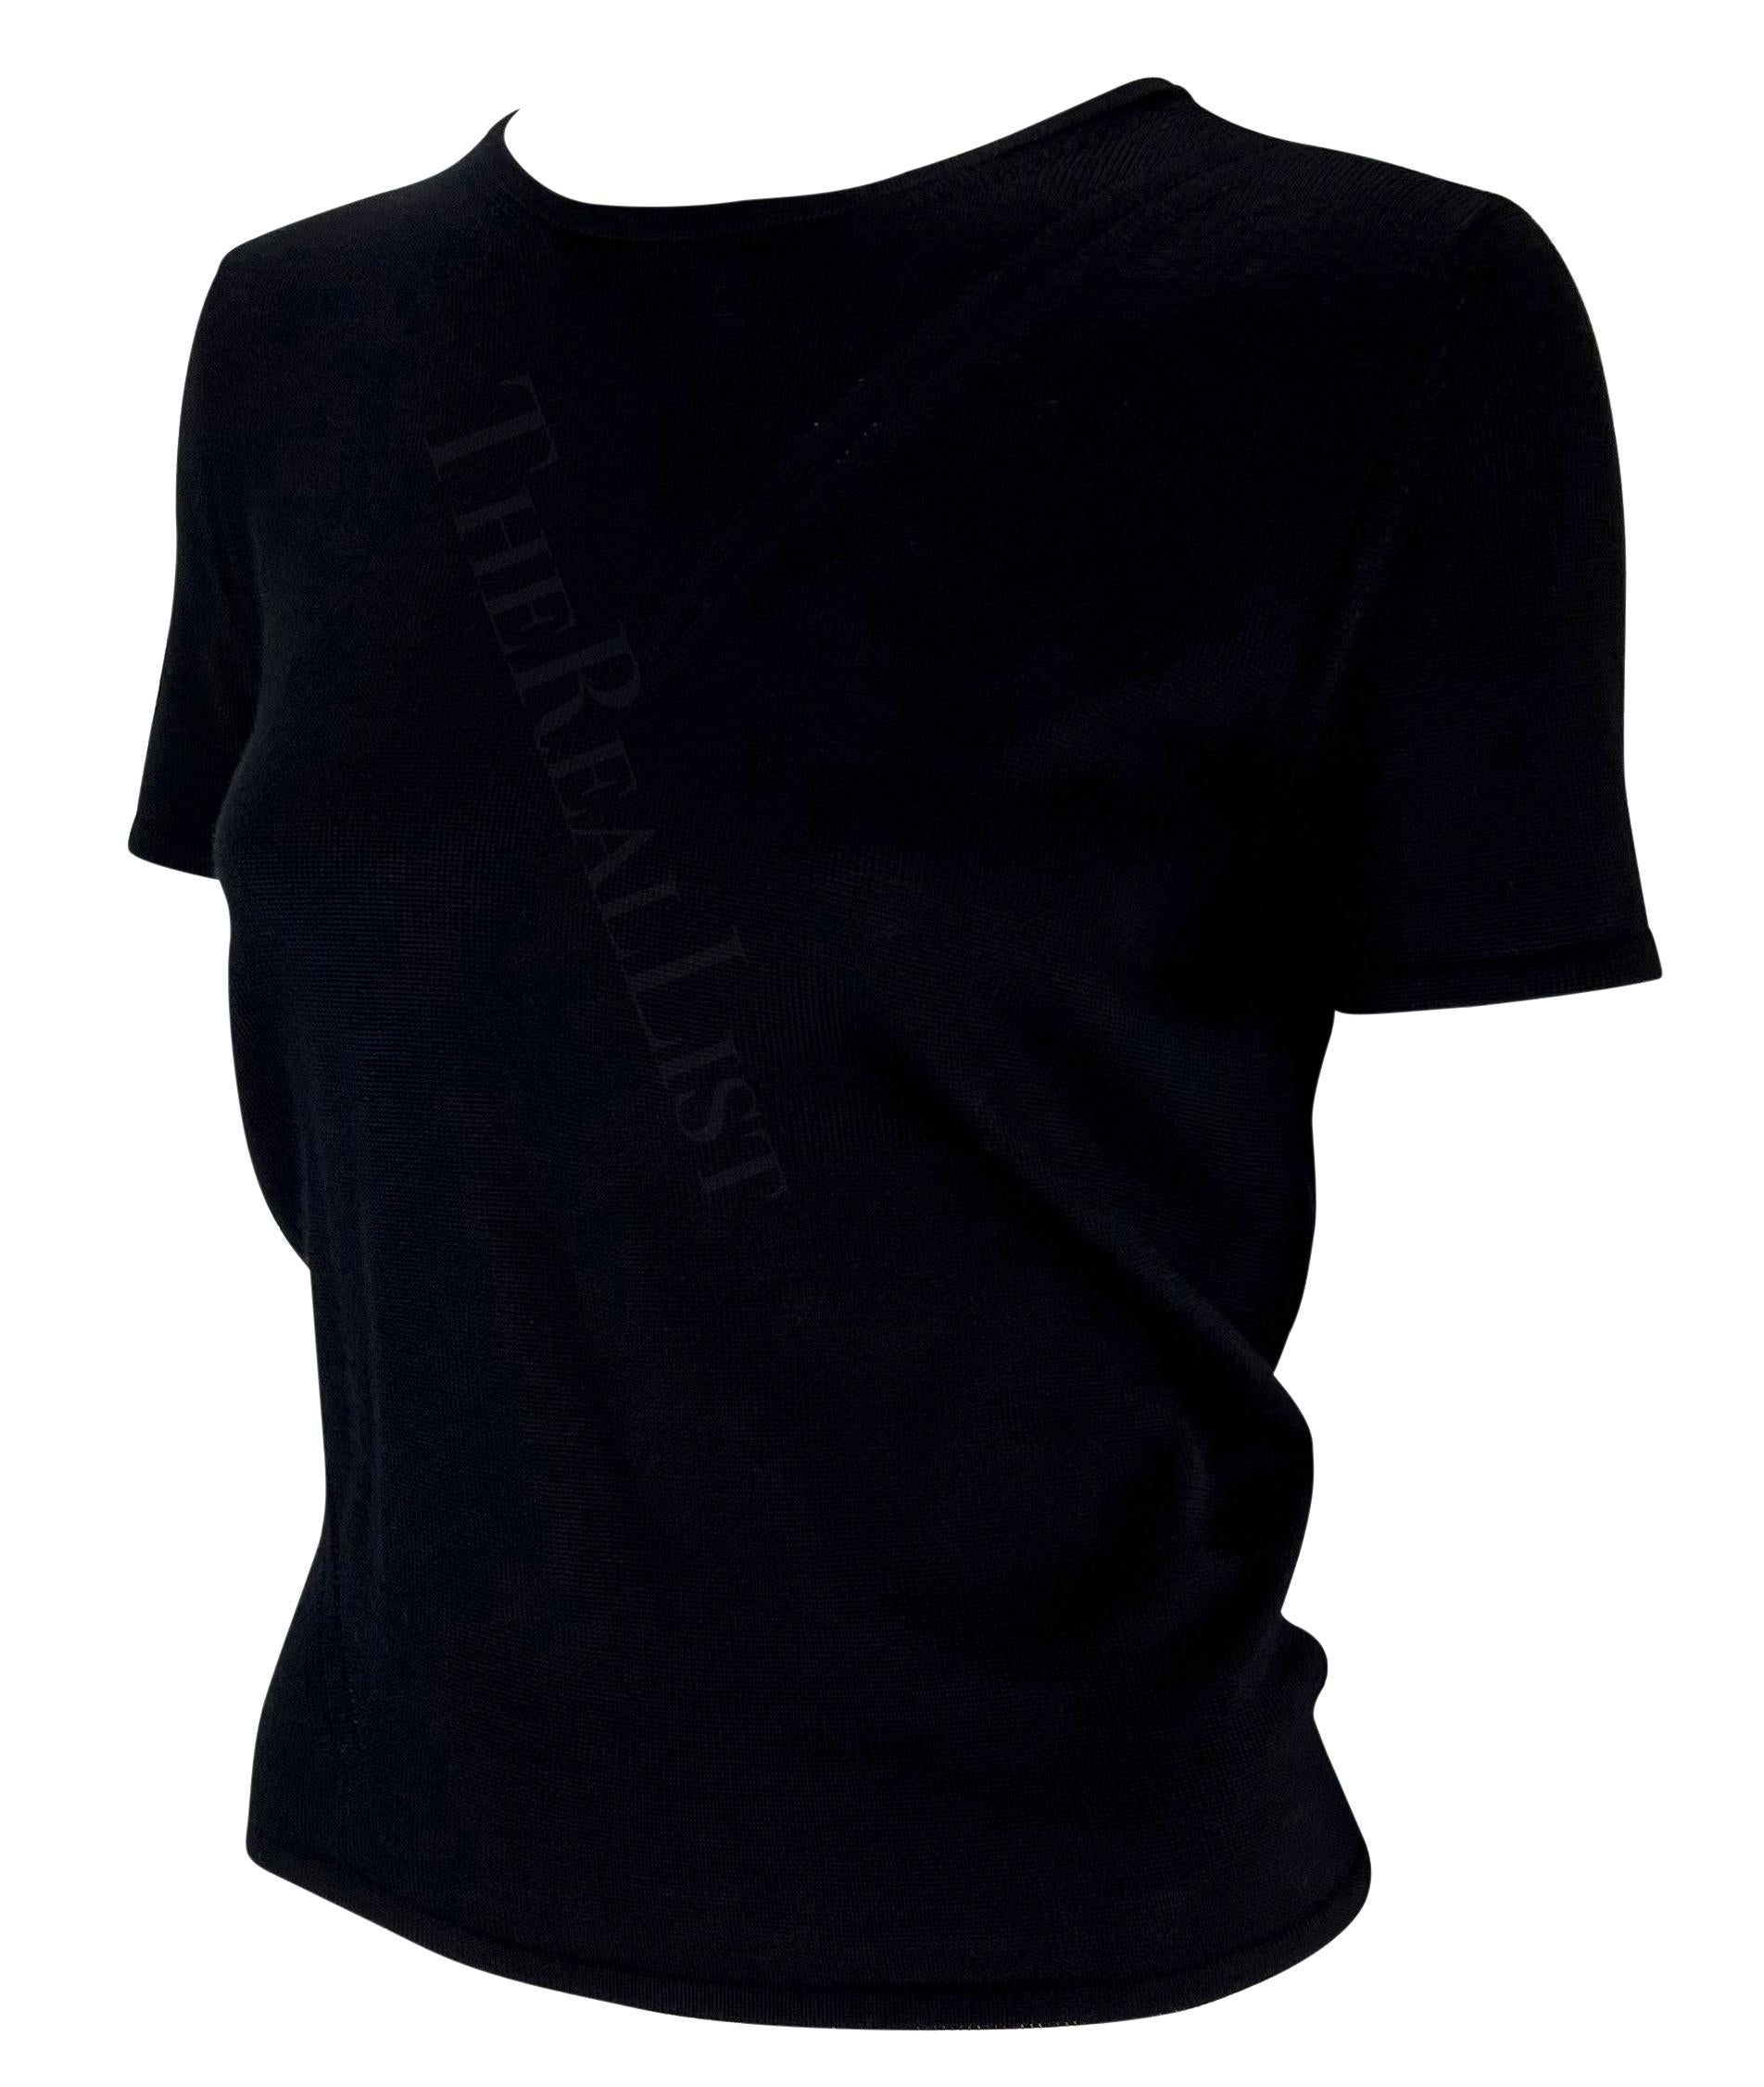 S/S 1997 Gucci by Tom Ford Open Back Black Stretch Knit Short-Sleeve Top For Sale 1